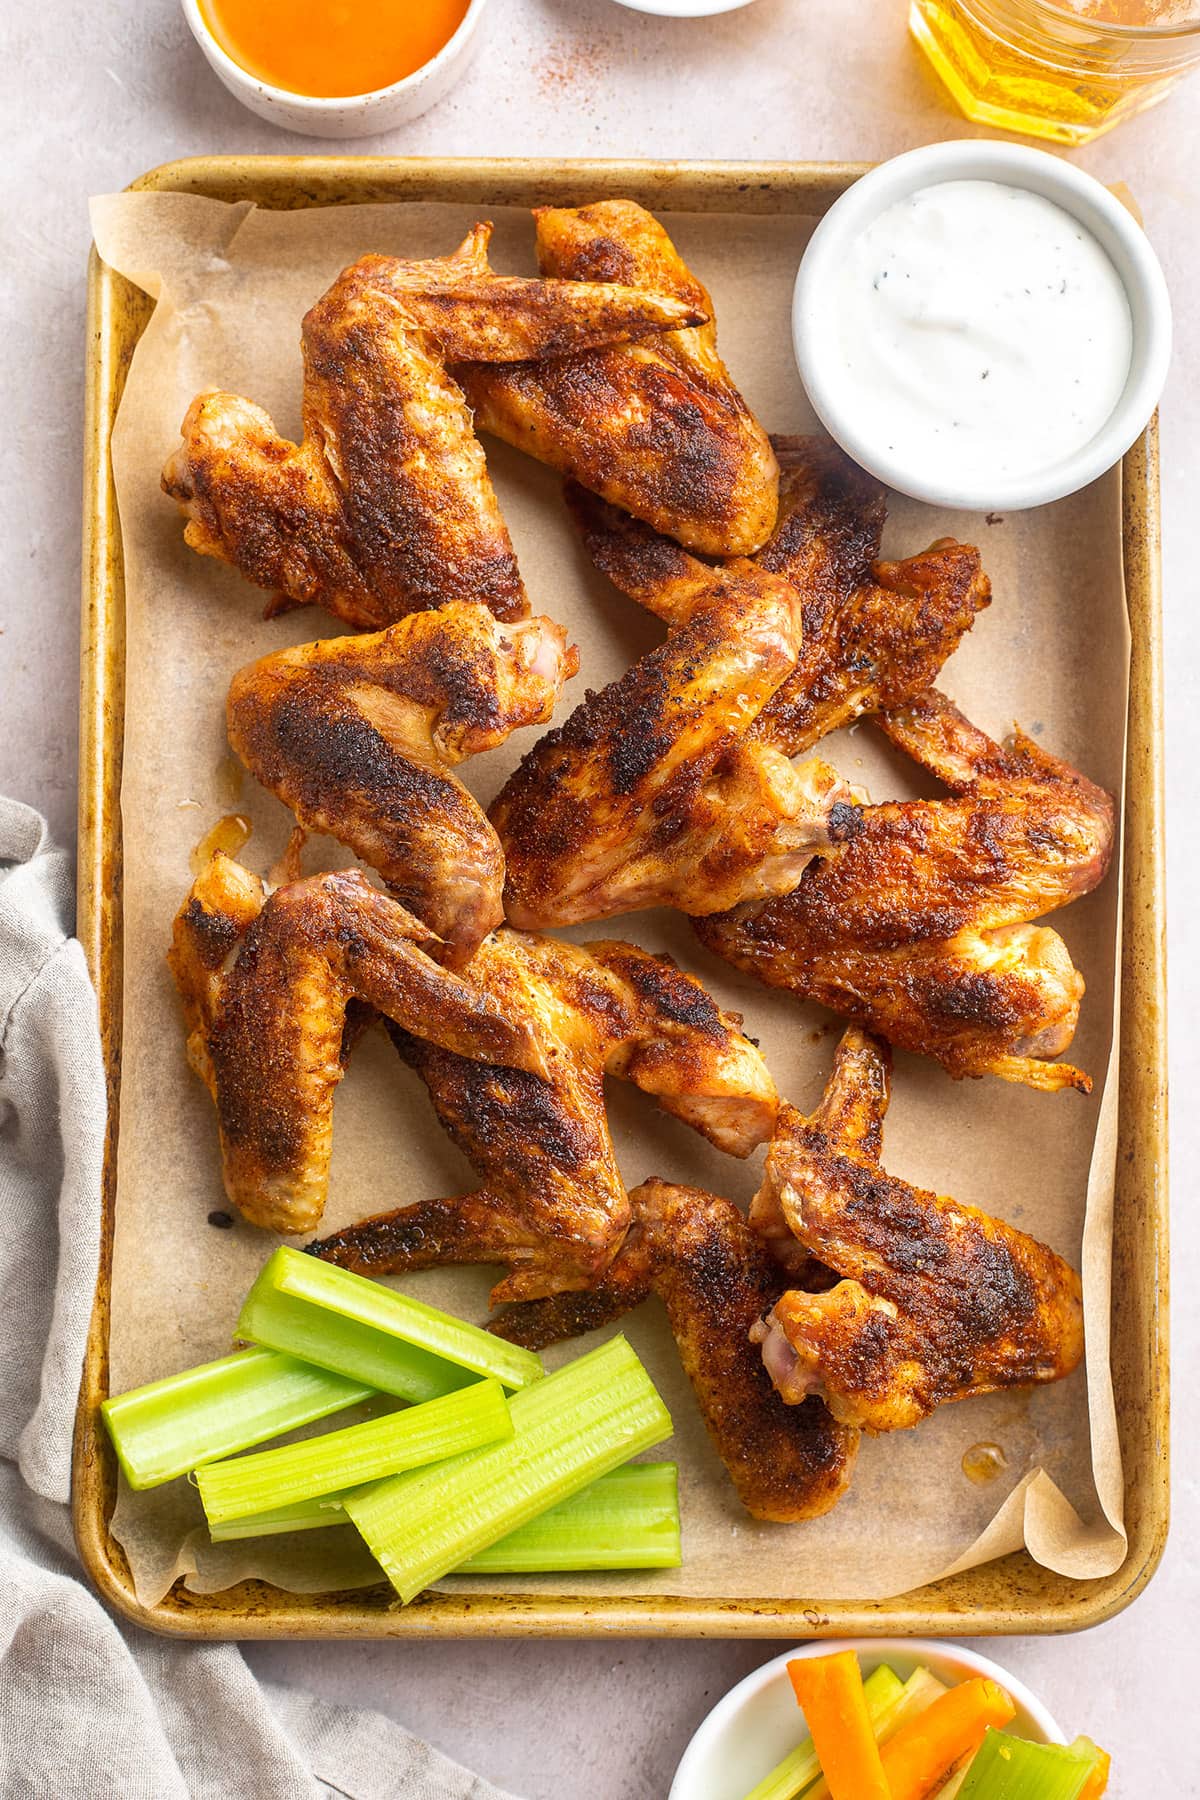 Whole chicken wings on a baking sheet lined with parchment paper next to a ramekin of ranch dressing.